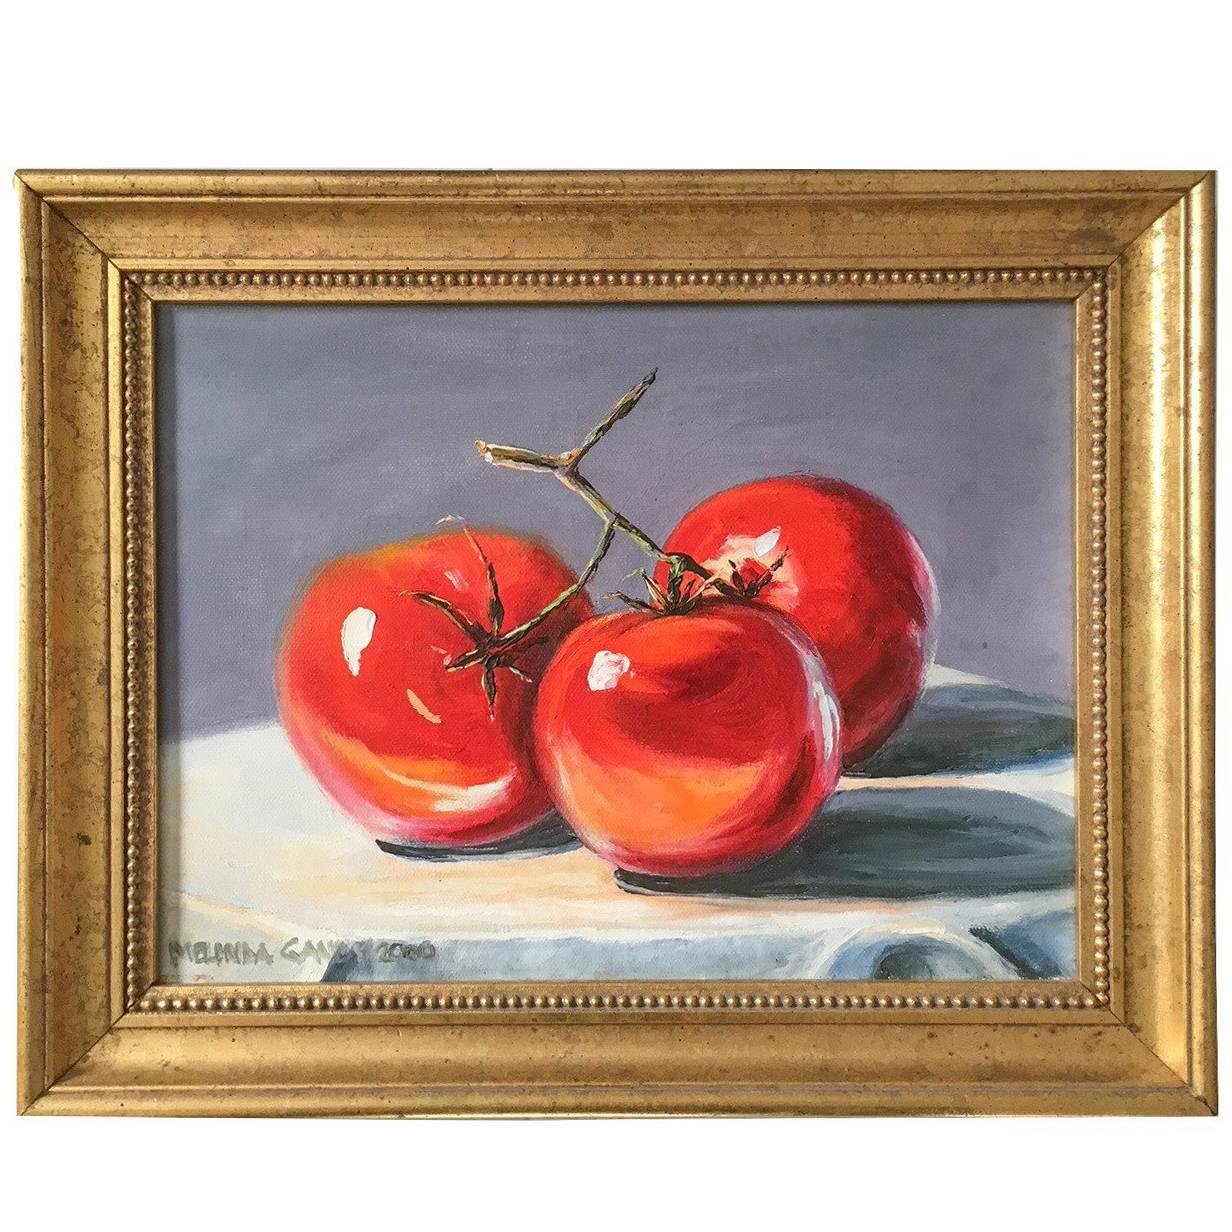 Composition of Three Tomatoes by Melinda Gandy, 2000